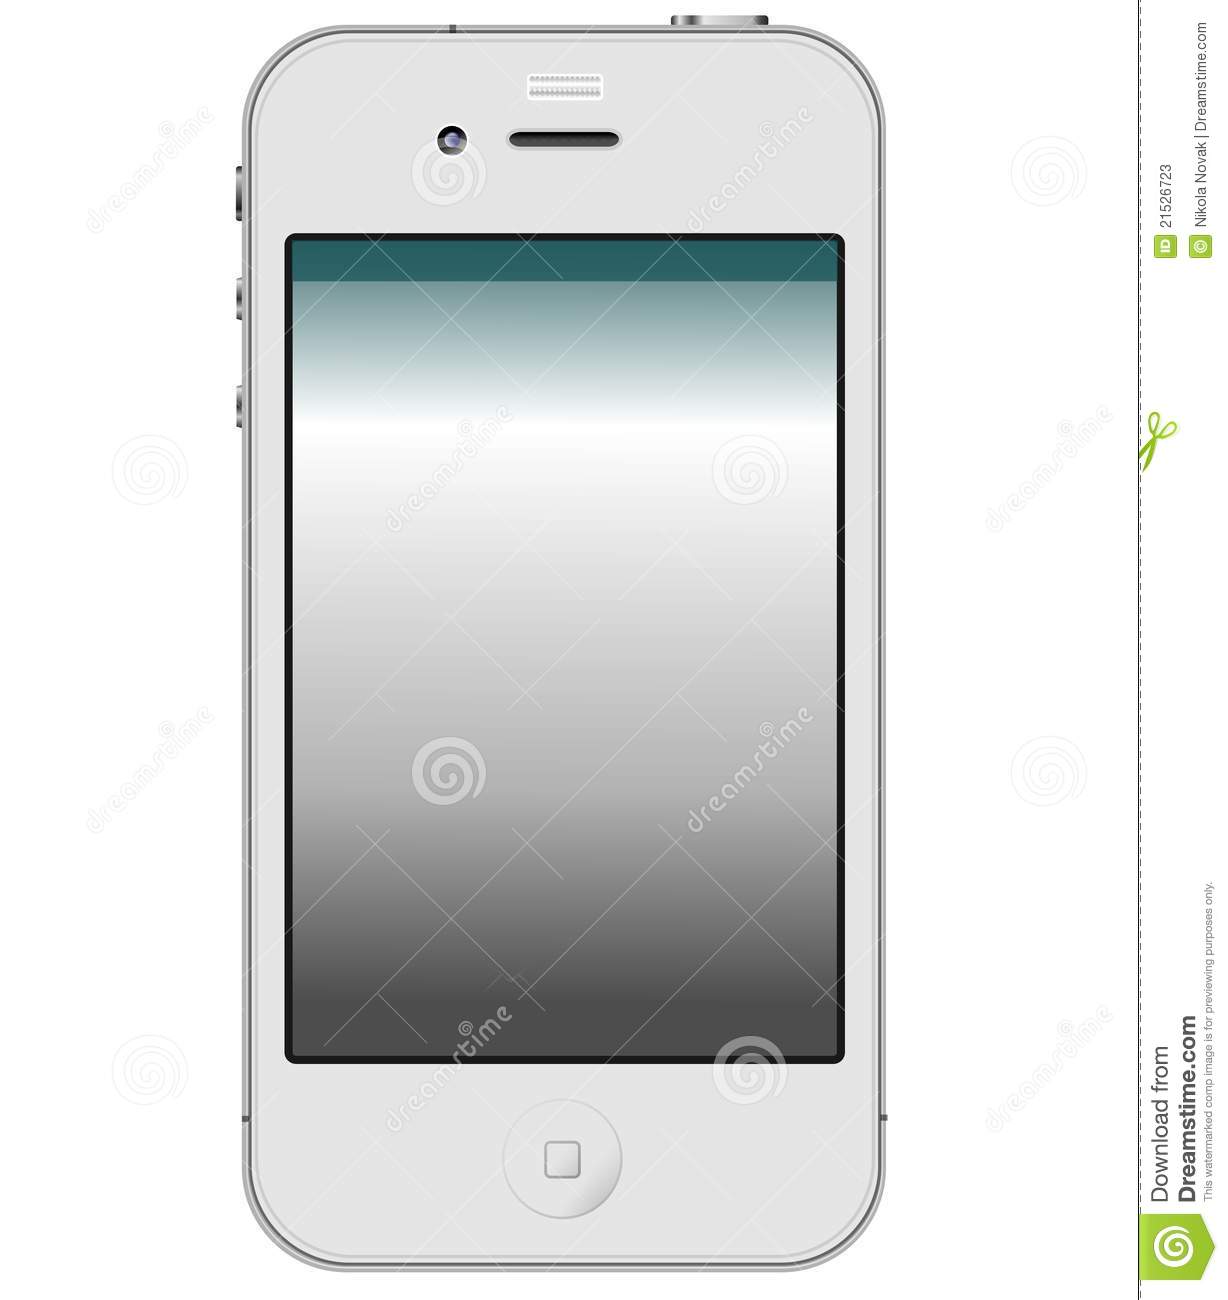 Apple Iphone 2d Illustration Created From A Real Photo With Shapes And